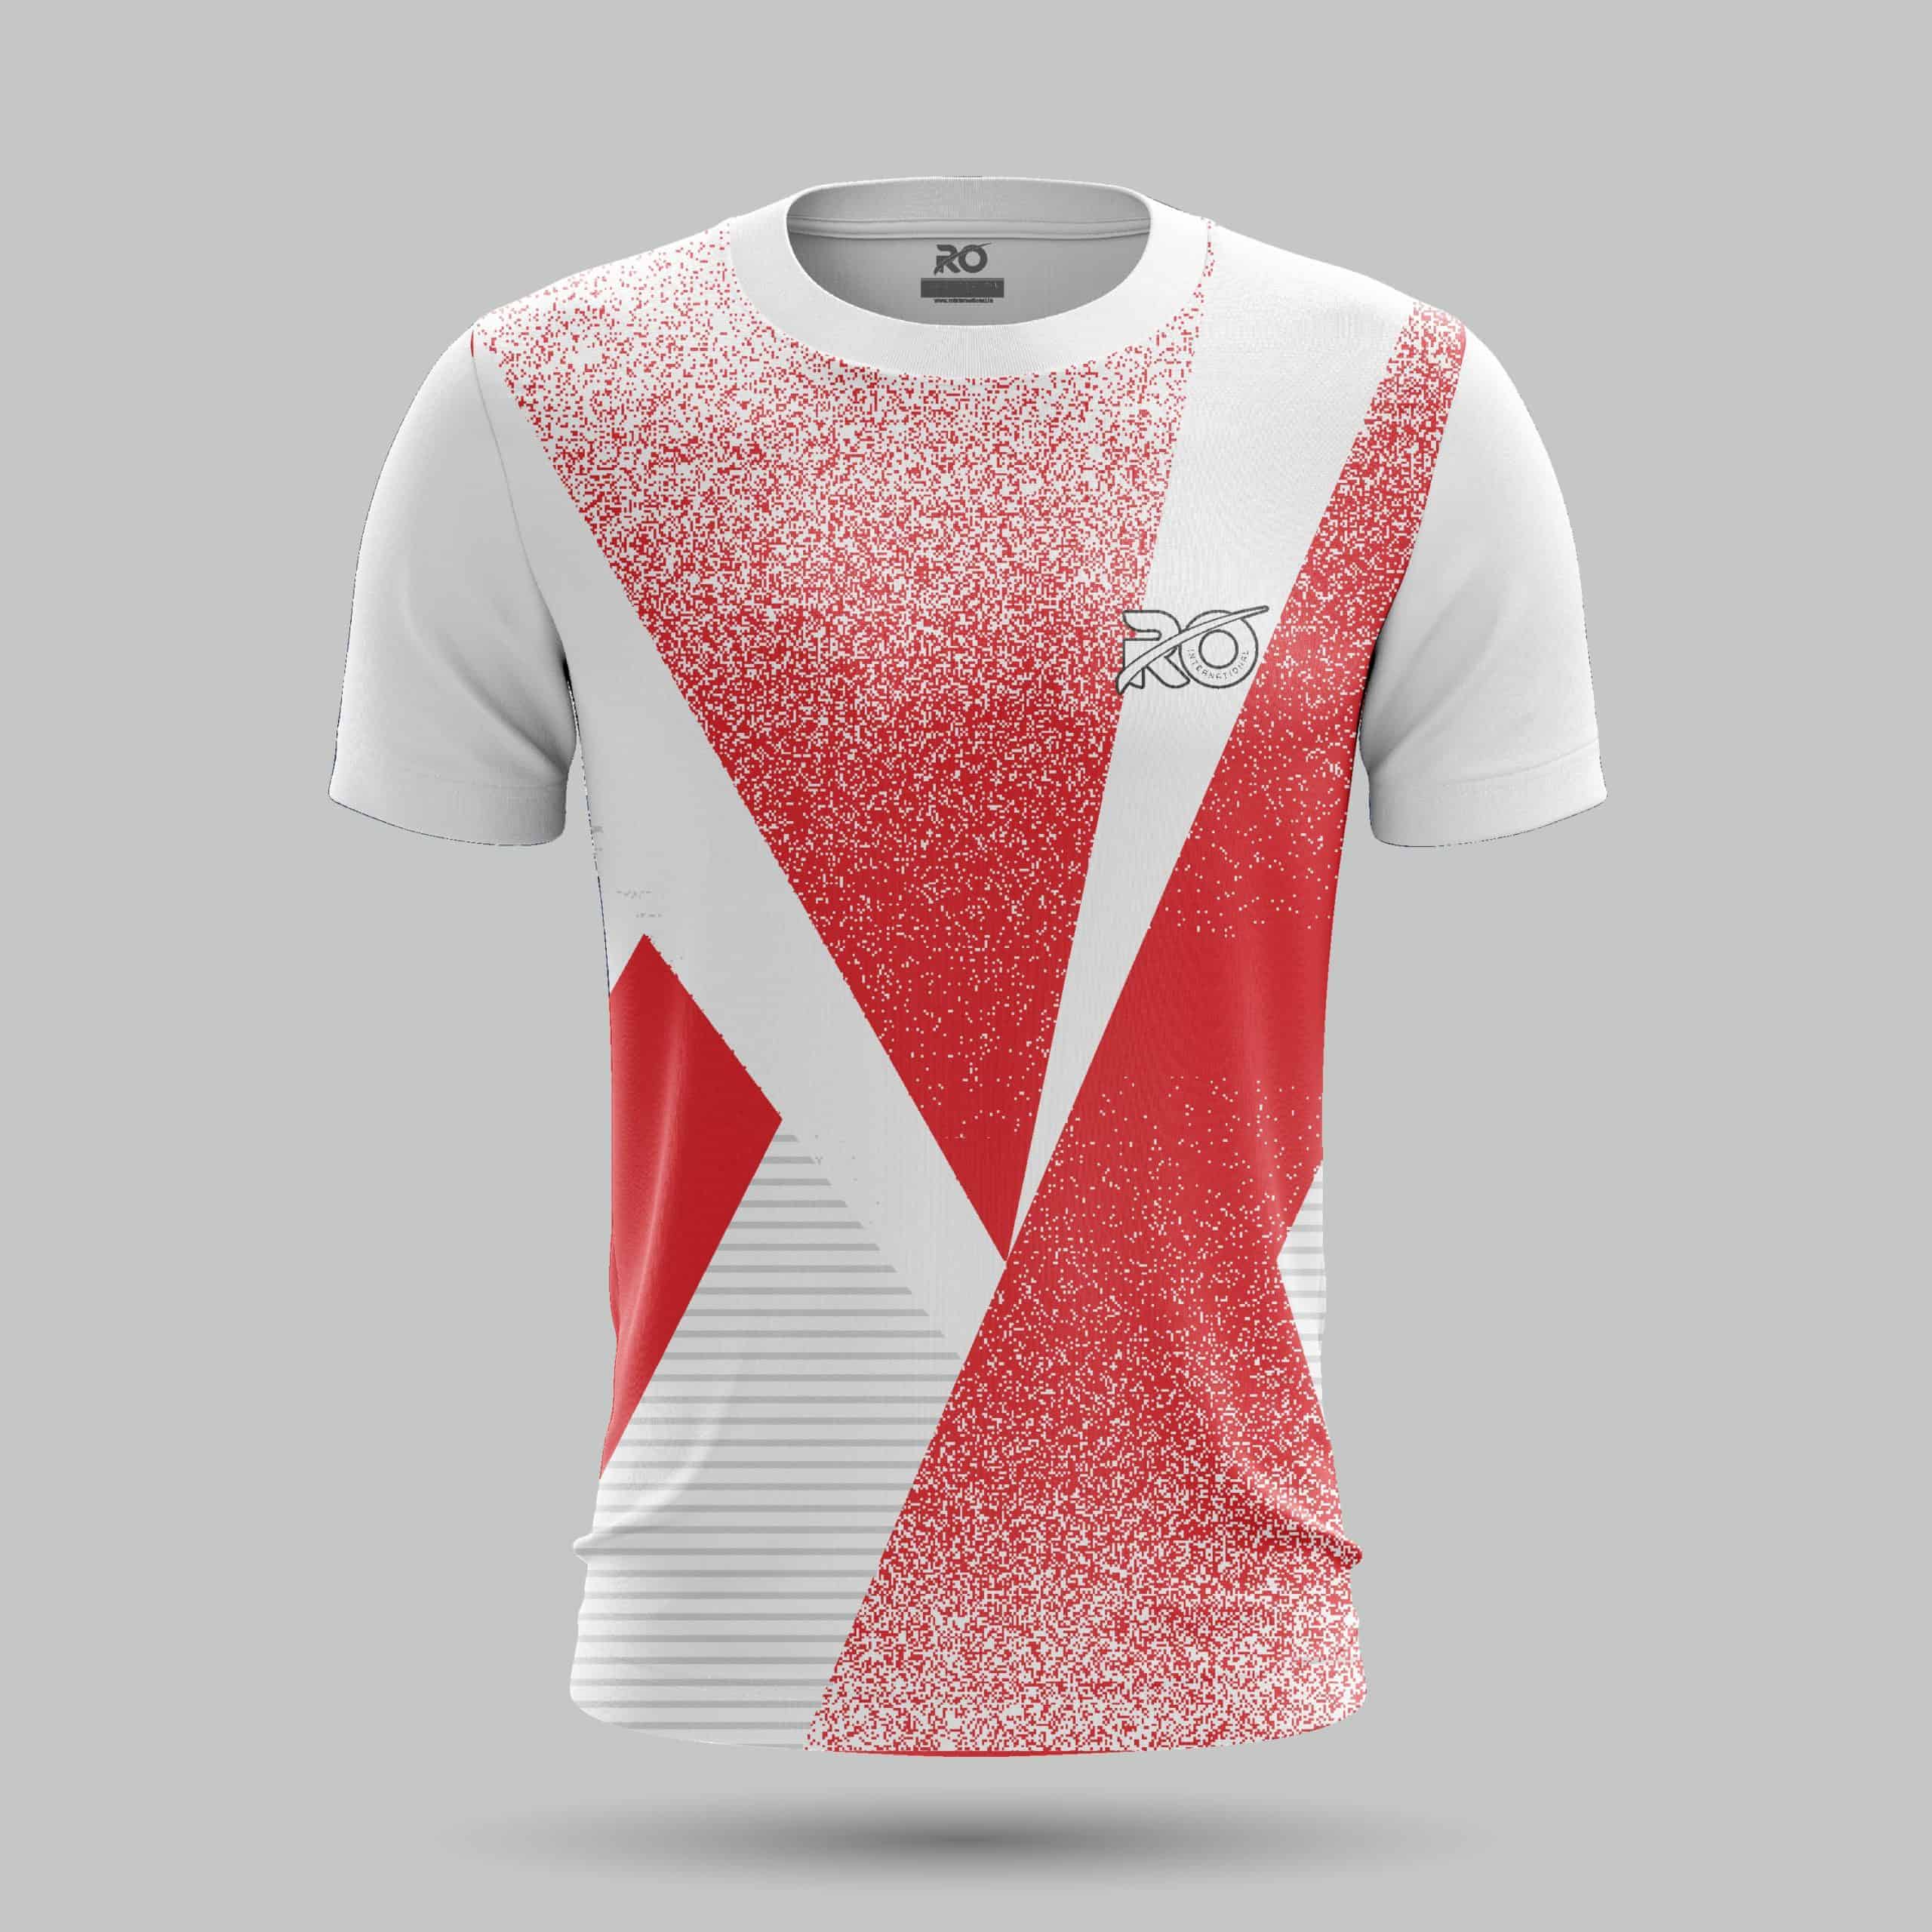 Ro Football Jersey White Red